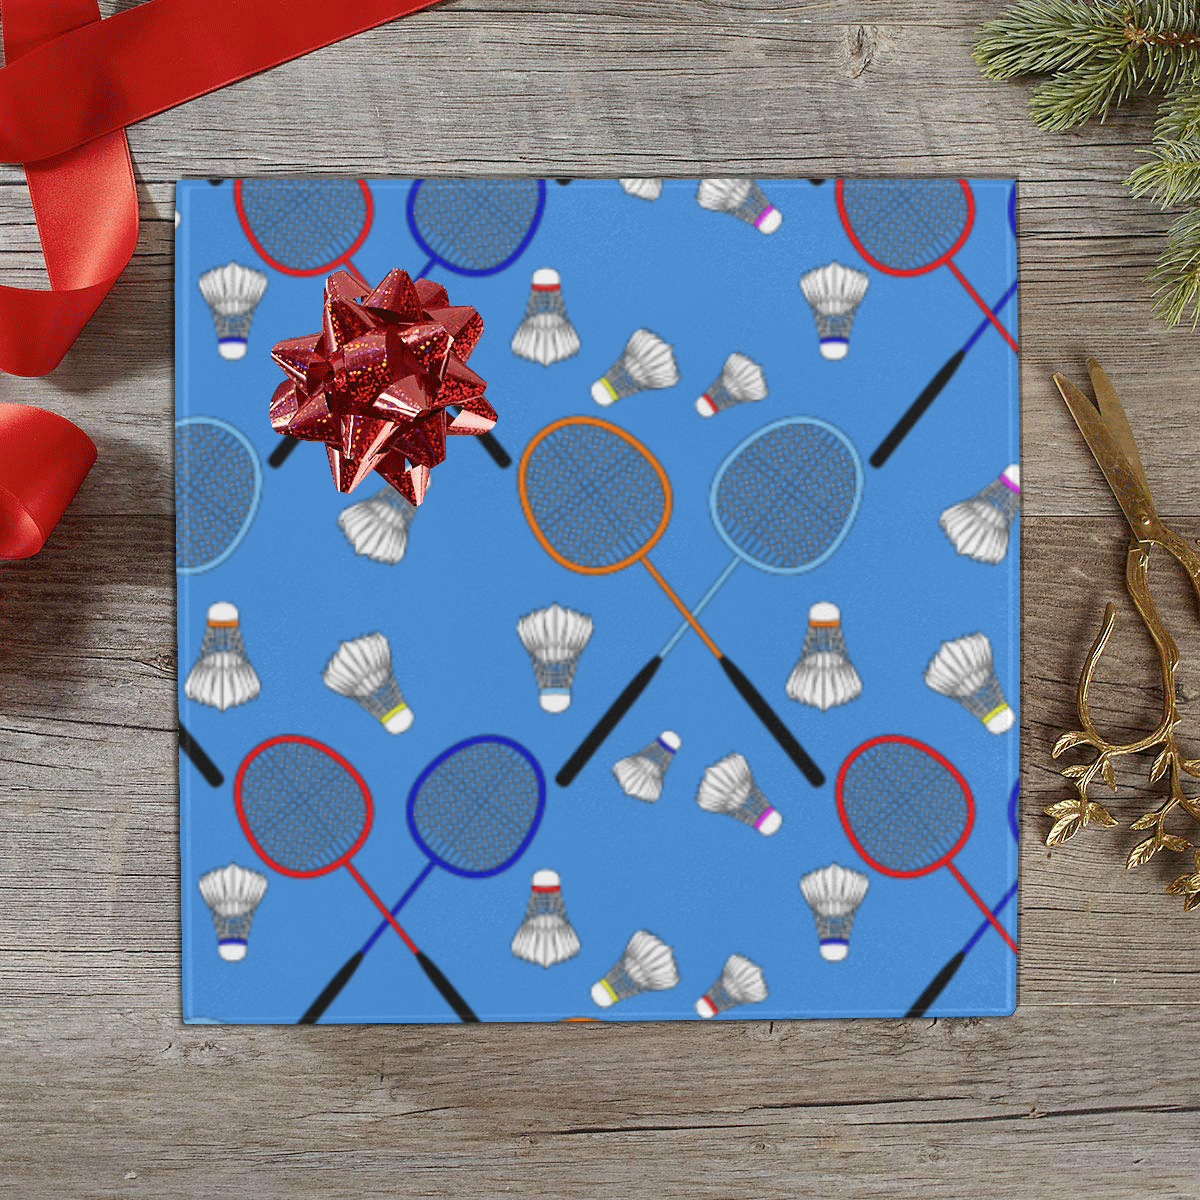 Badminton Rackets and Shuttlecocks Pattern Sports Blue Gift Wrapping Paper 58"x 23" (2 Rolls)